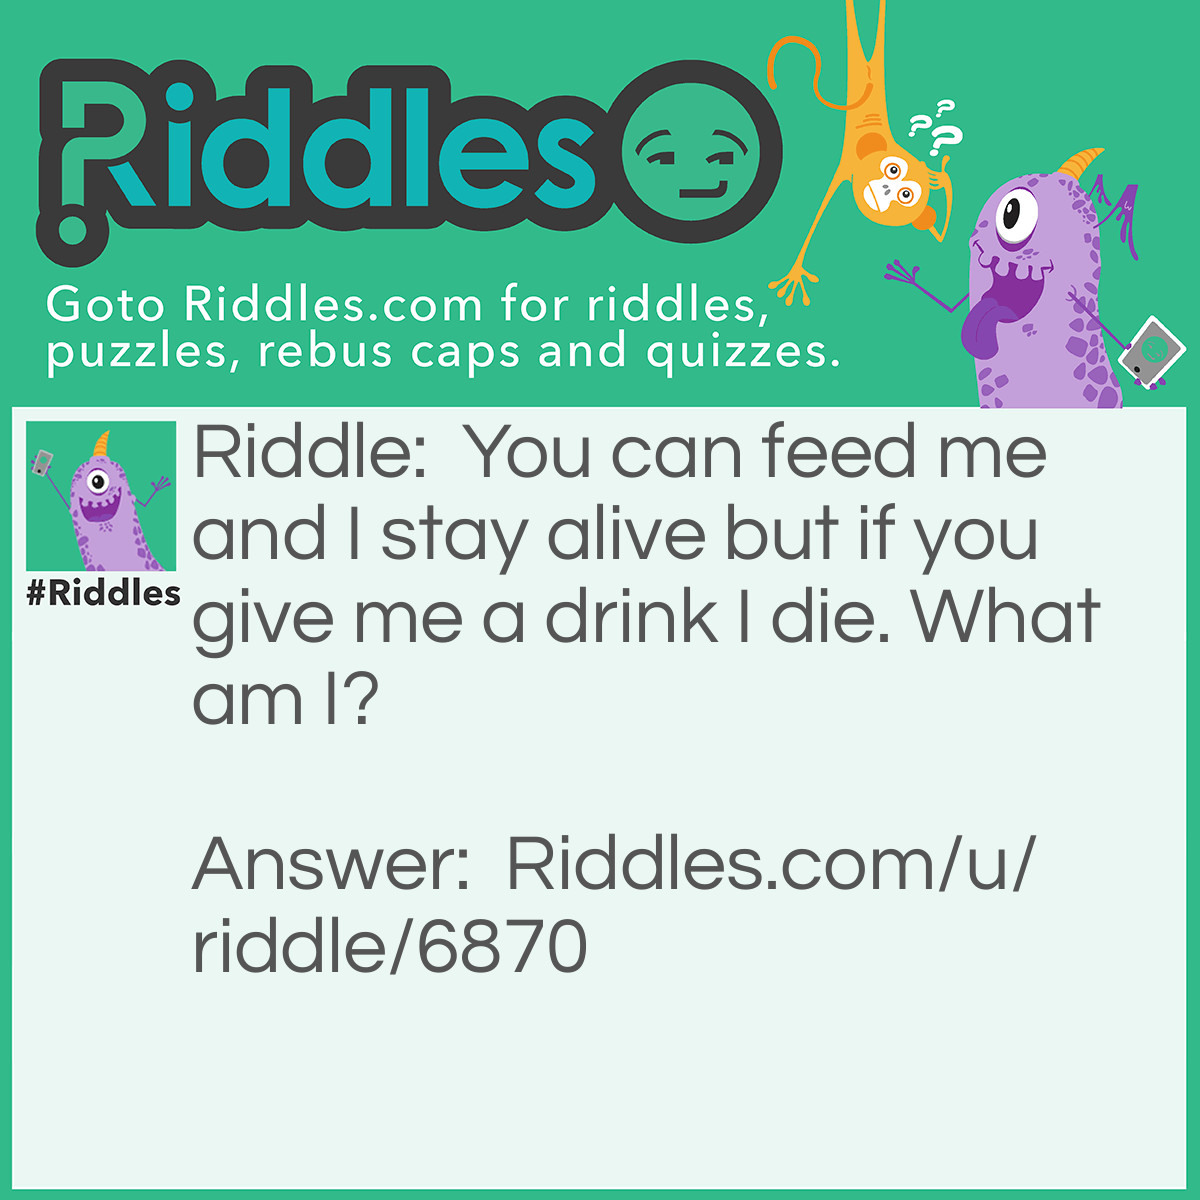 Riddle: You can feed me and I stay alive but if you give me a drink I die. What am I? Answer: A Fire.